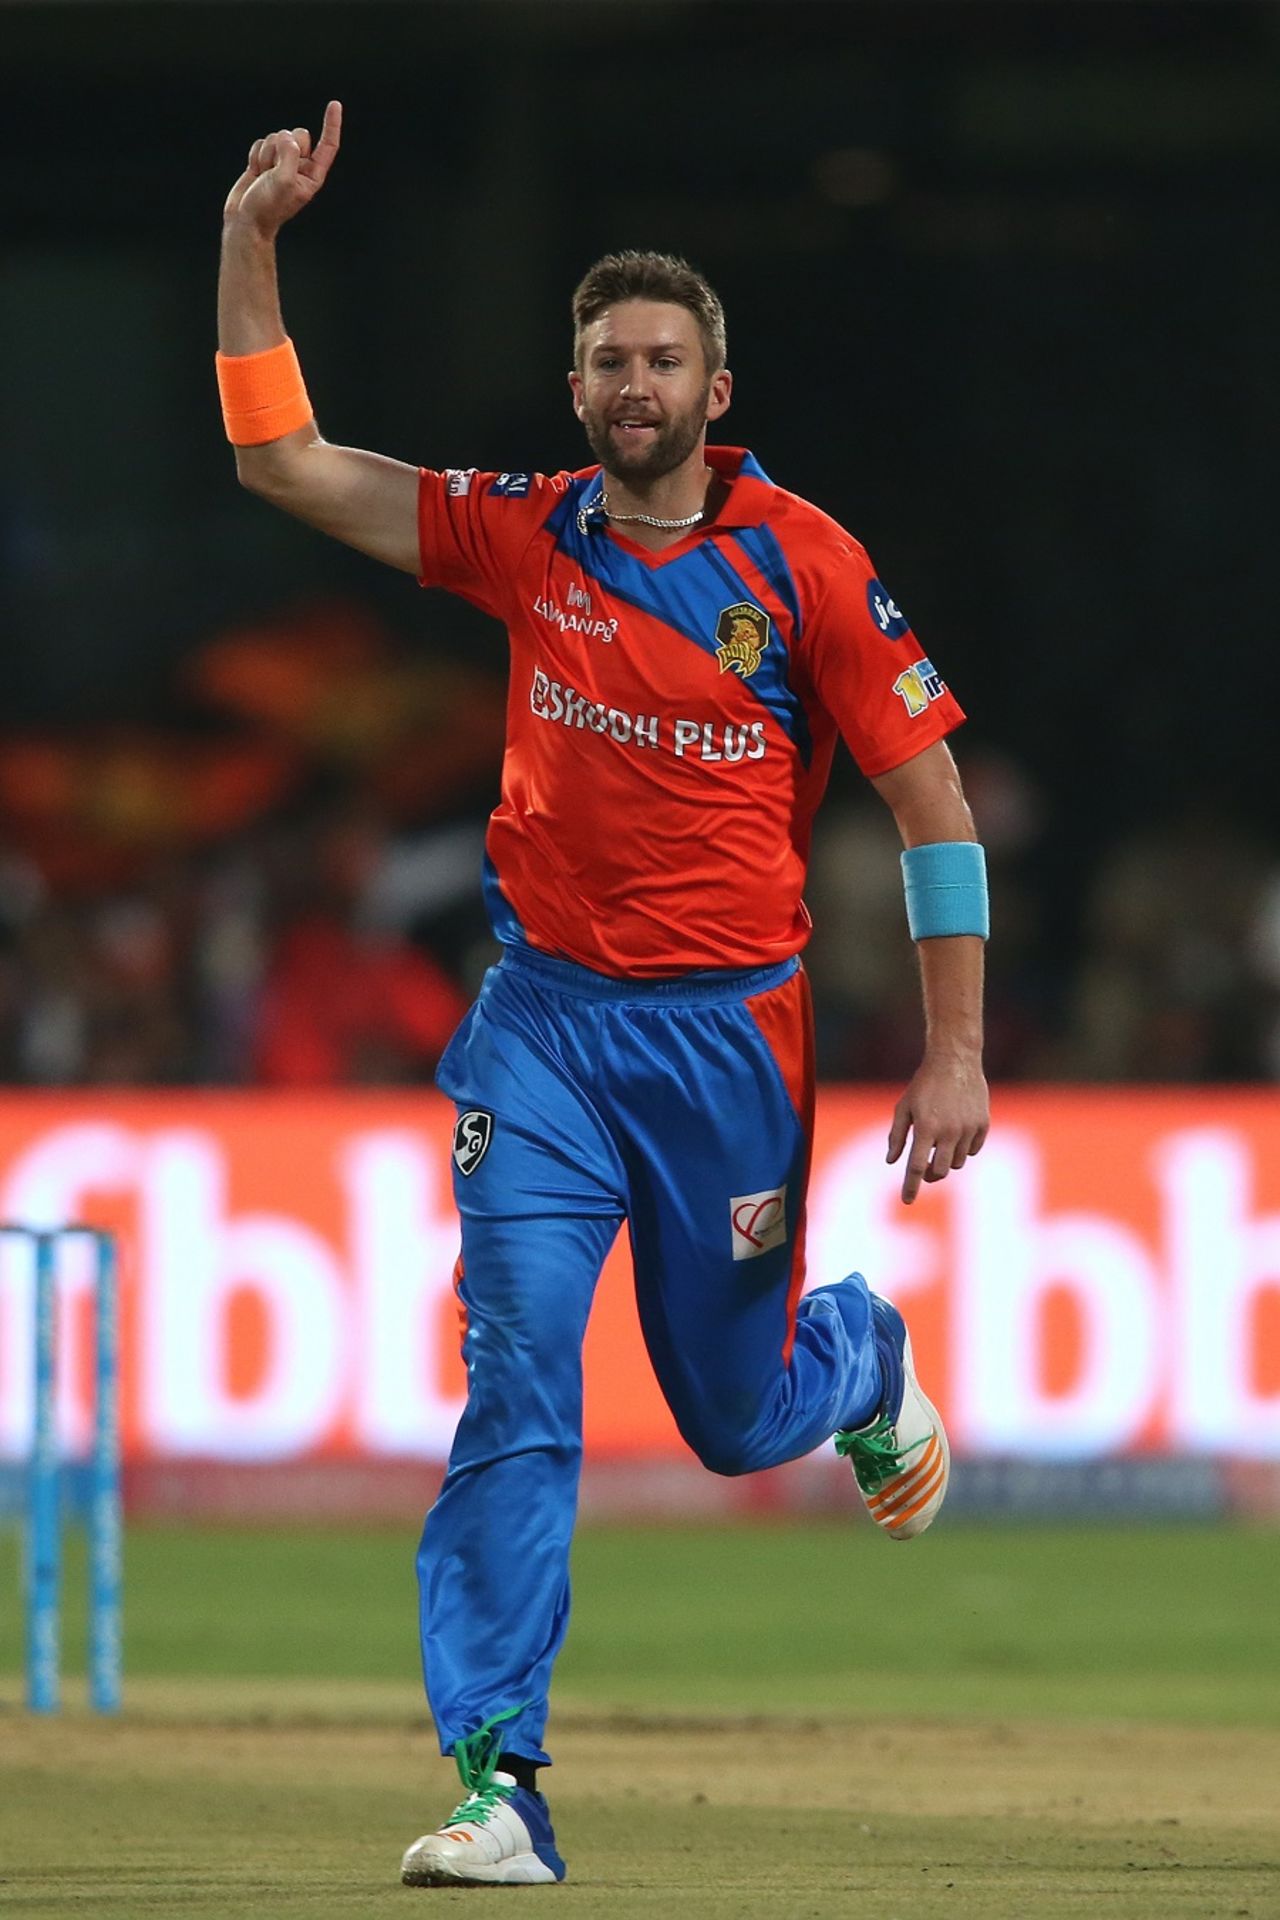 Andrew Tye struck twice in two balls to derail Royal Challengers Bangalore's innings, Royal Challengers Bangalore v Gujarat Lions, IPL 2017, Bengaluru, April 27, 2017